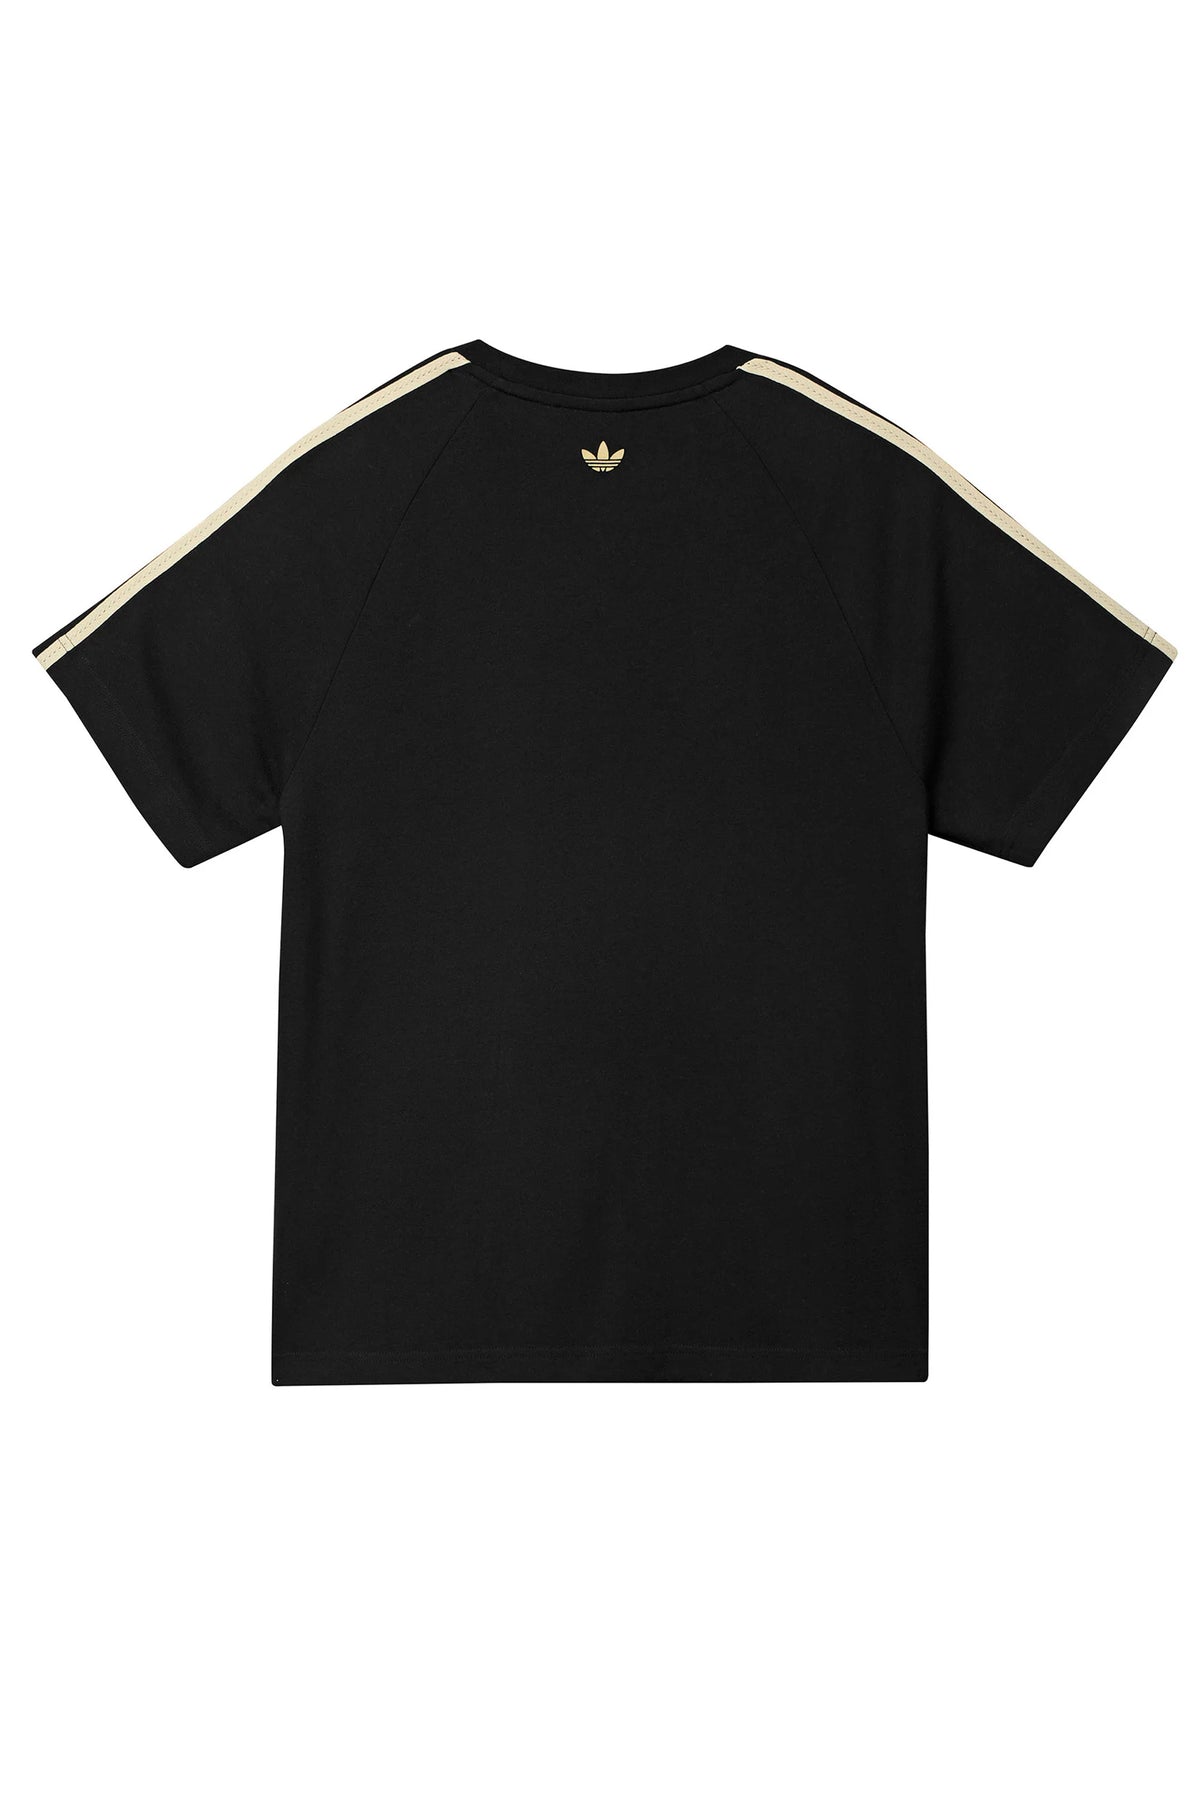 ADIDAS ORIGINALS BY WALES BONNER WB S/S TEE / BLK